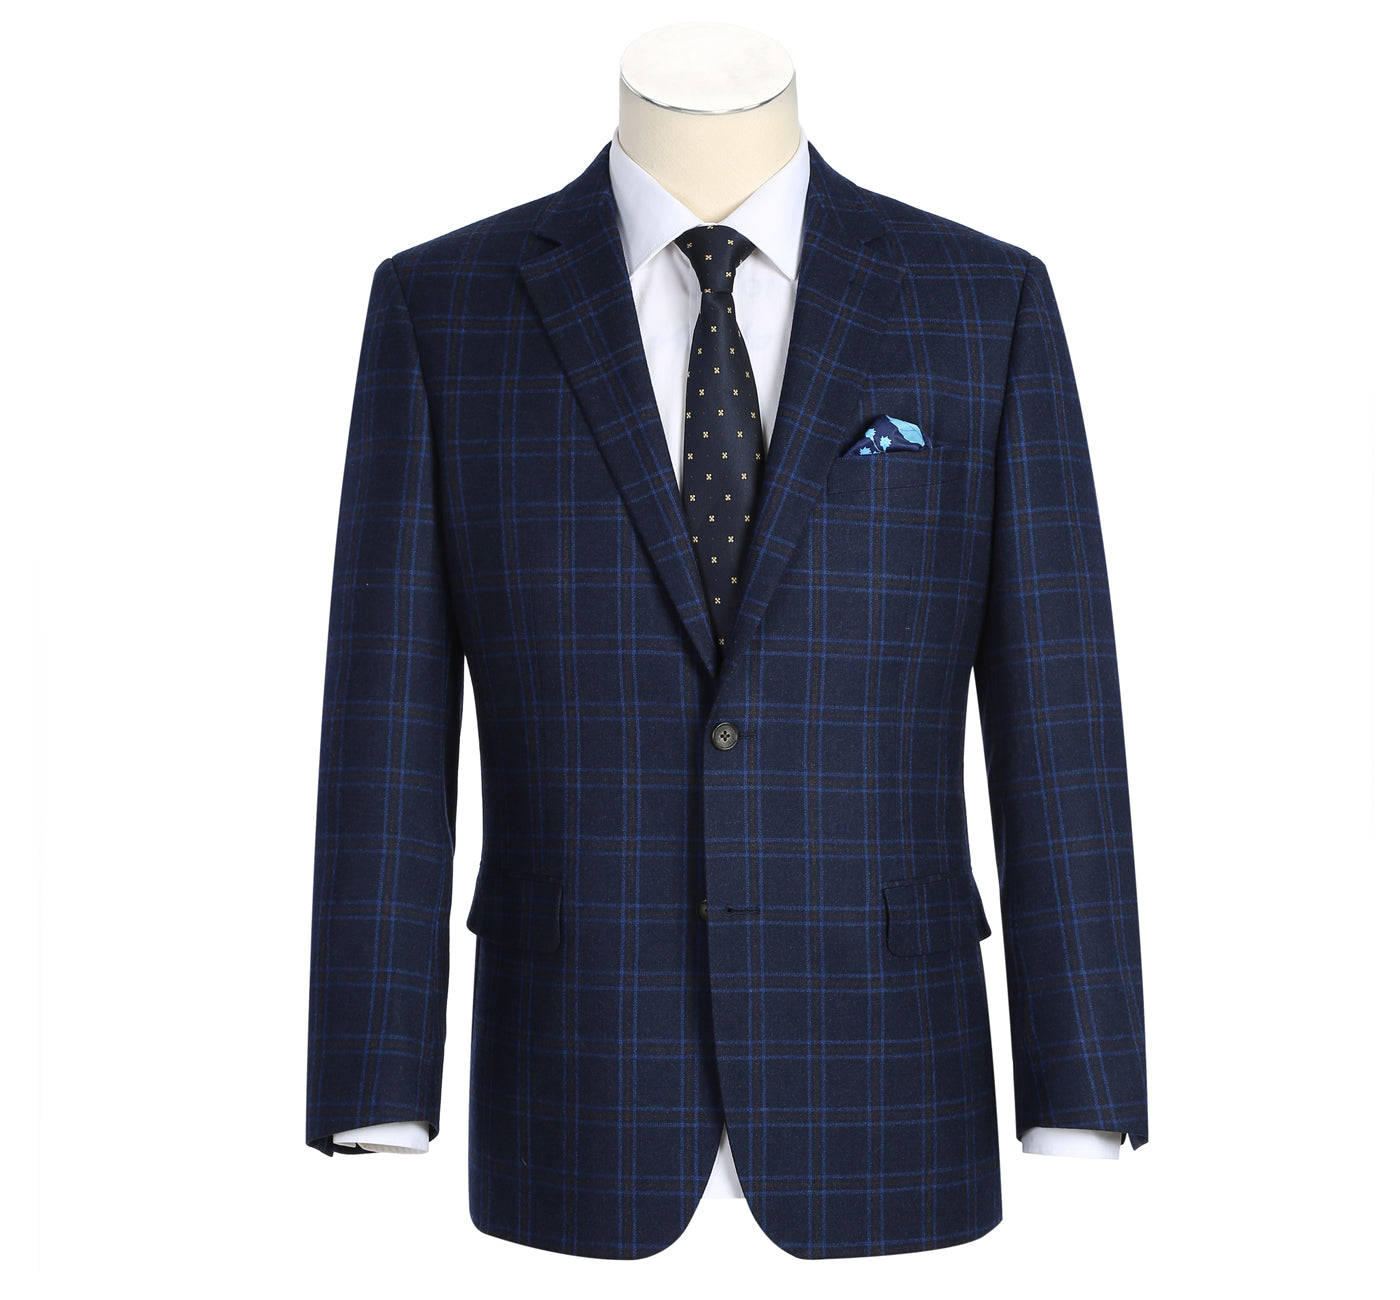 Men's Classic Fit Navy with Brown Heritage Check Wool Blend Suit Jacket